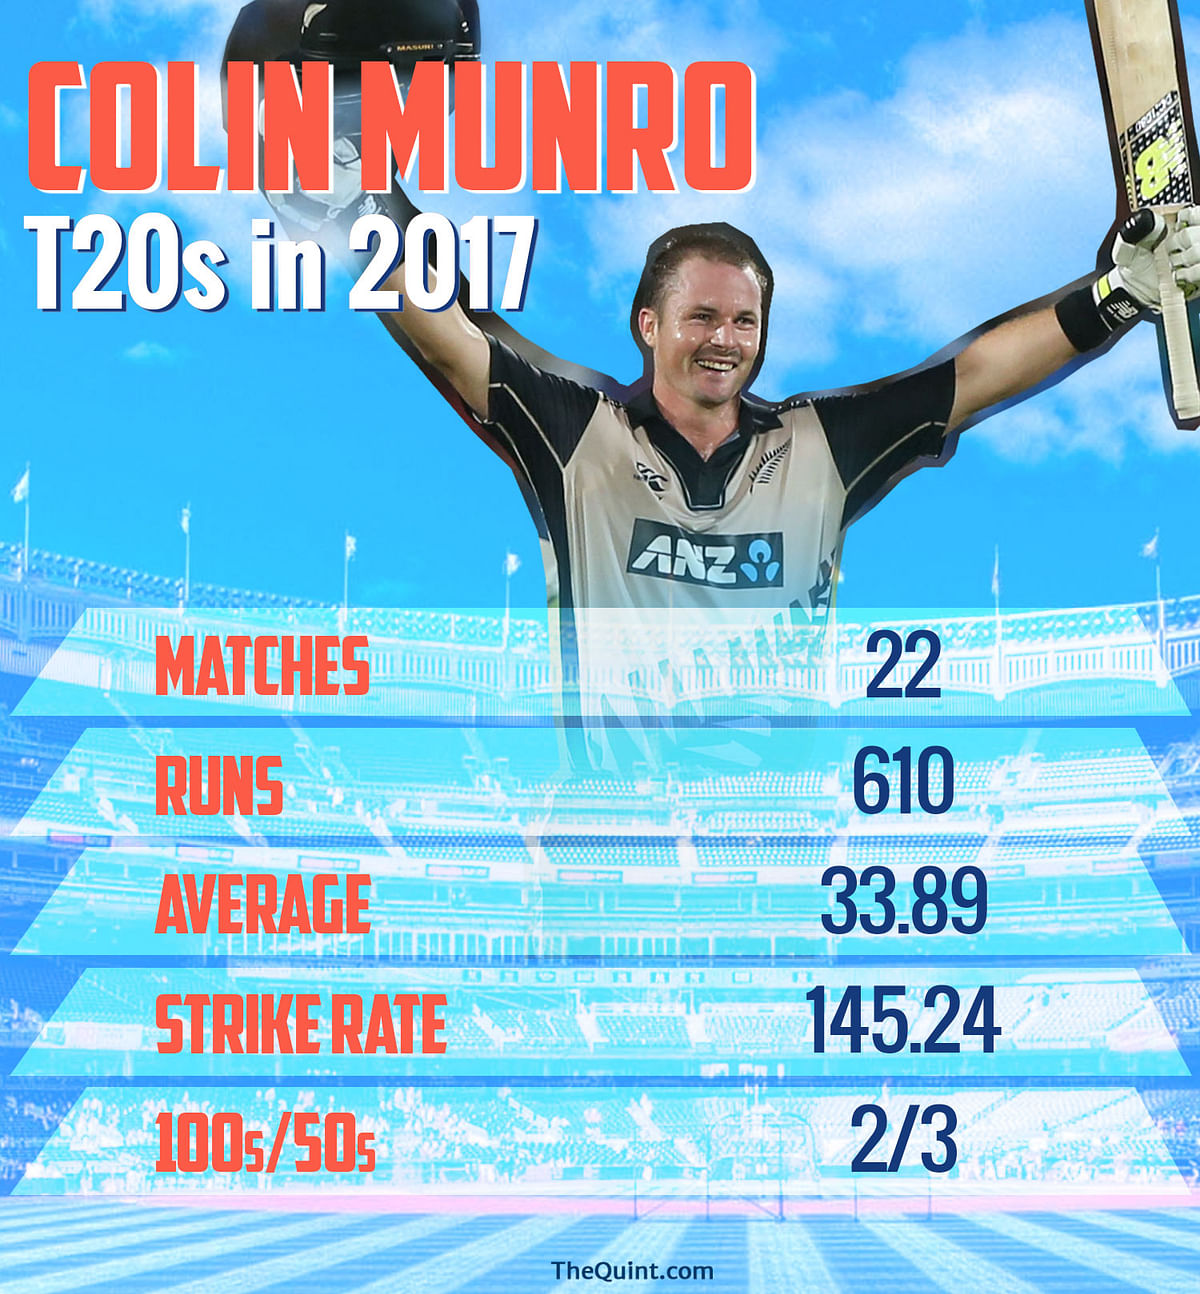 Statistician Arun Gopalakrishnan previews the third T20 match between India and New Zealand through numbers.